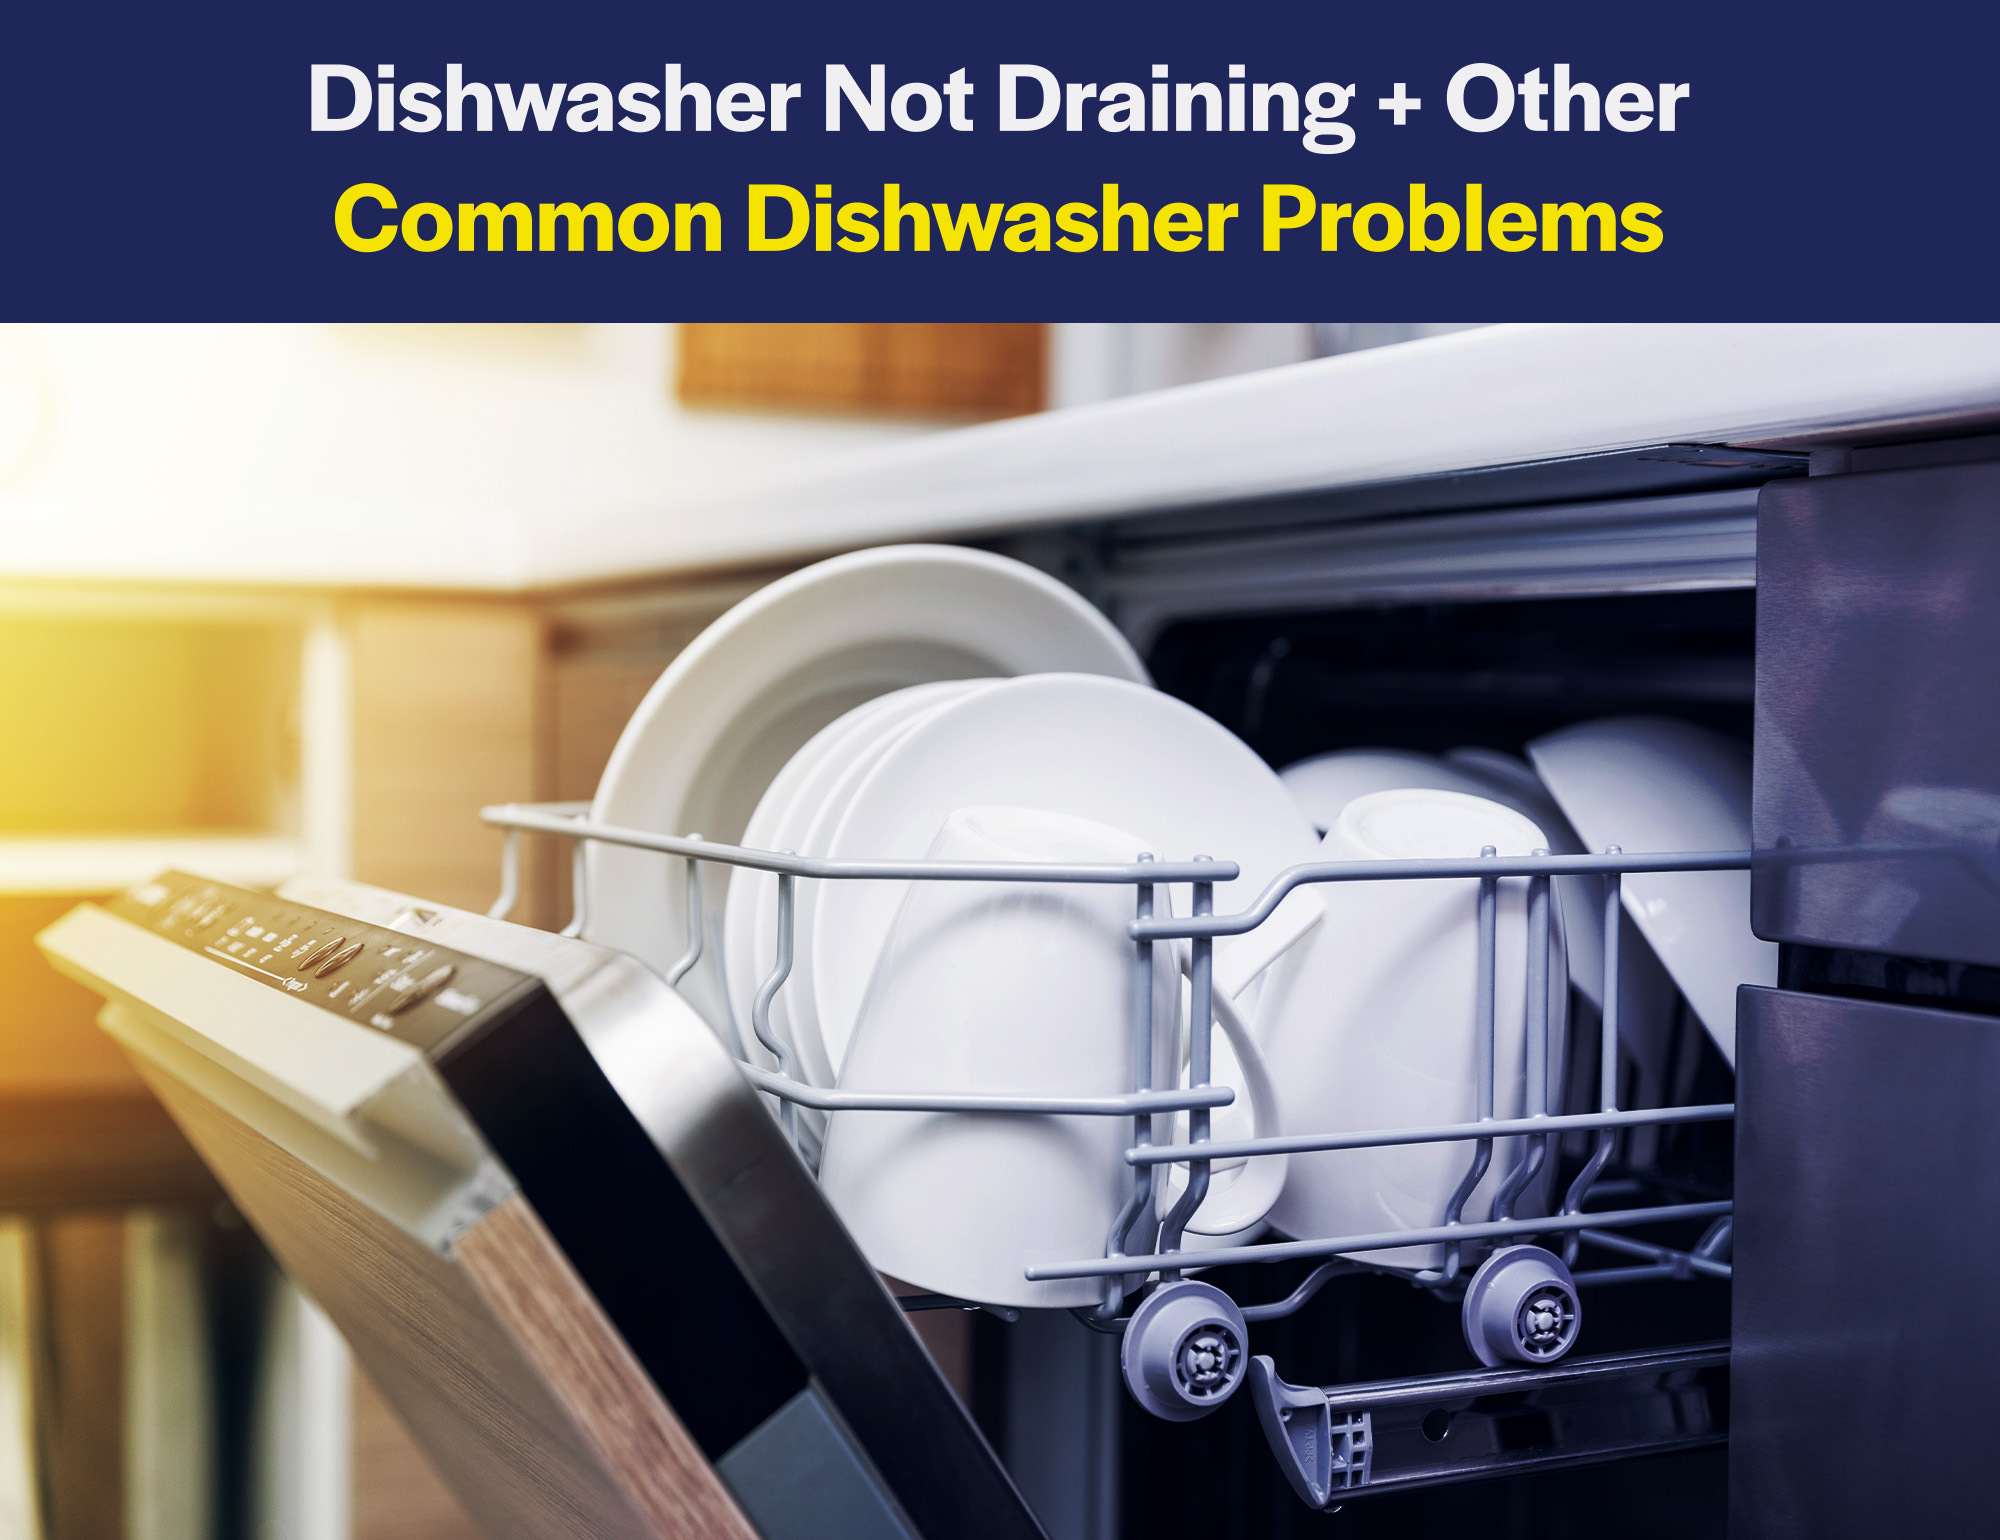 Dishwasher Not Draining and Other Common Dishwasher Problems